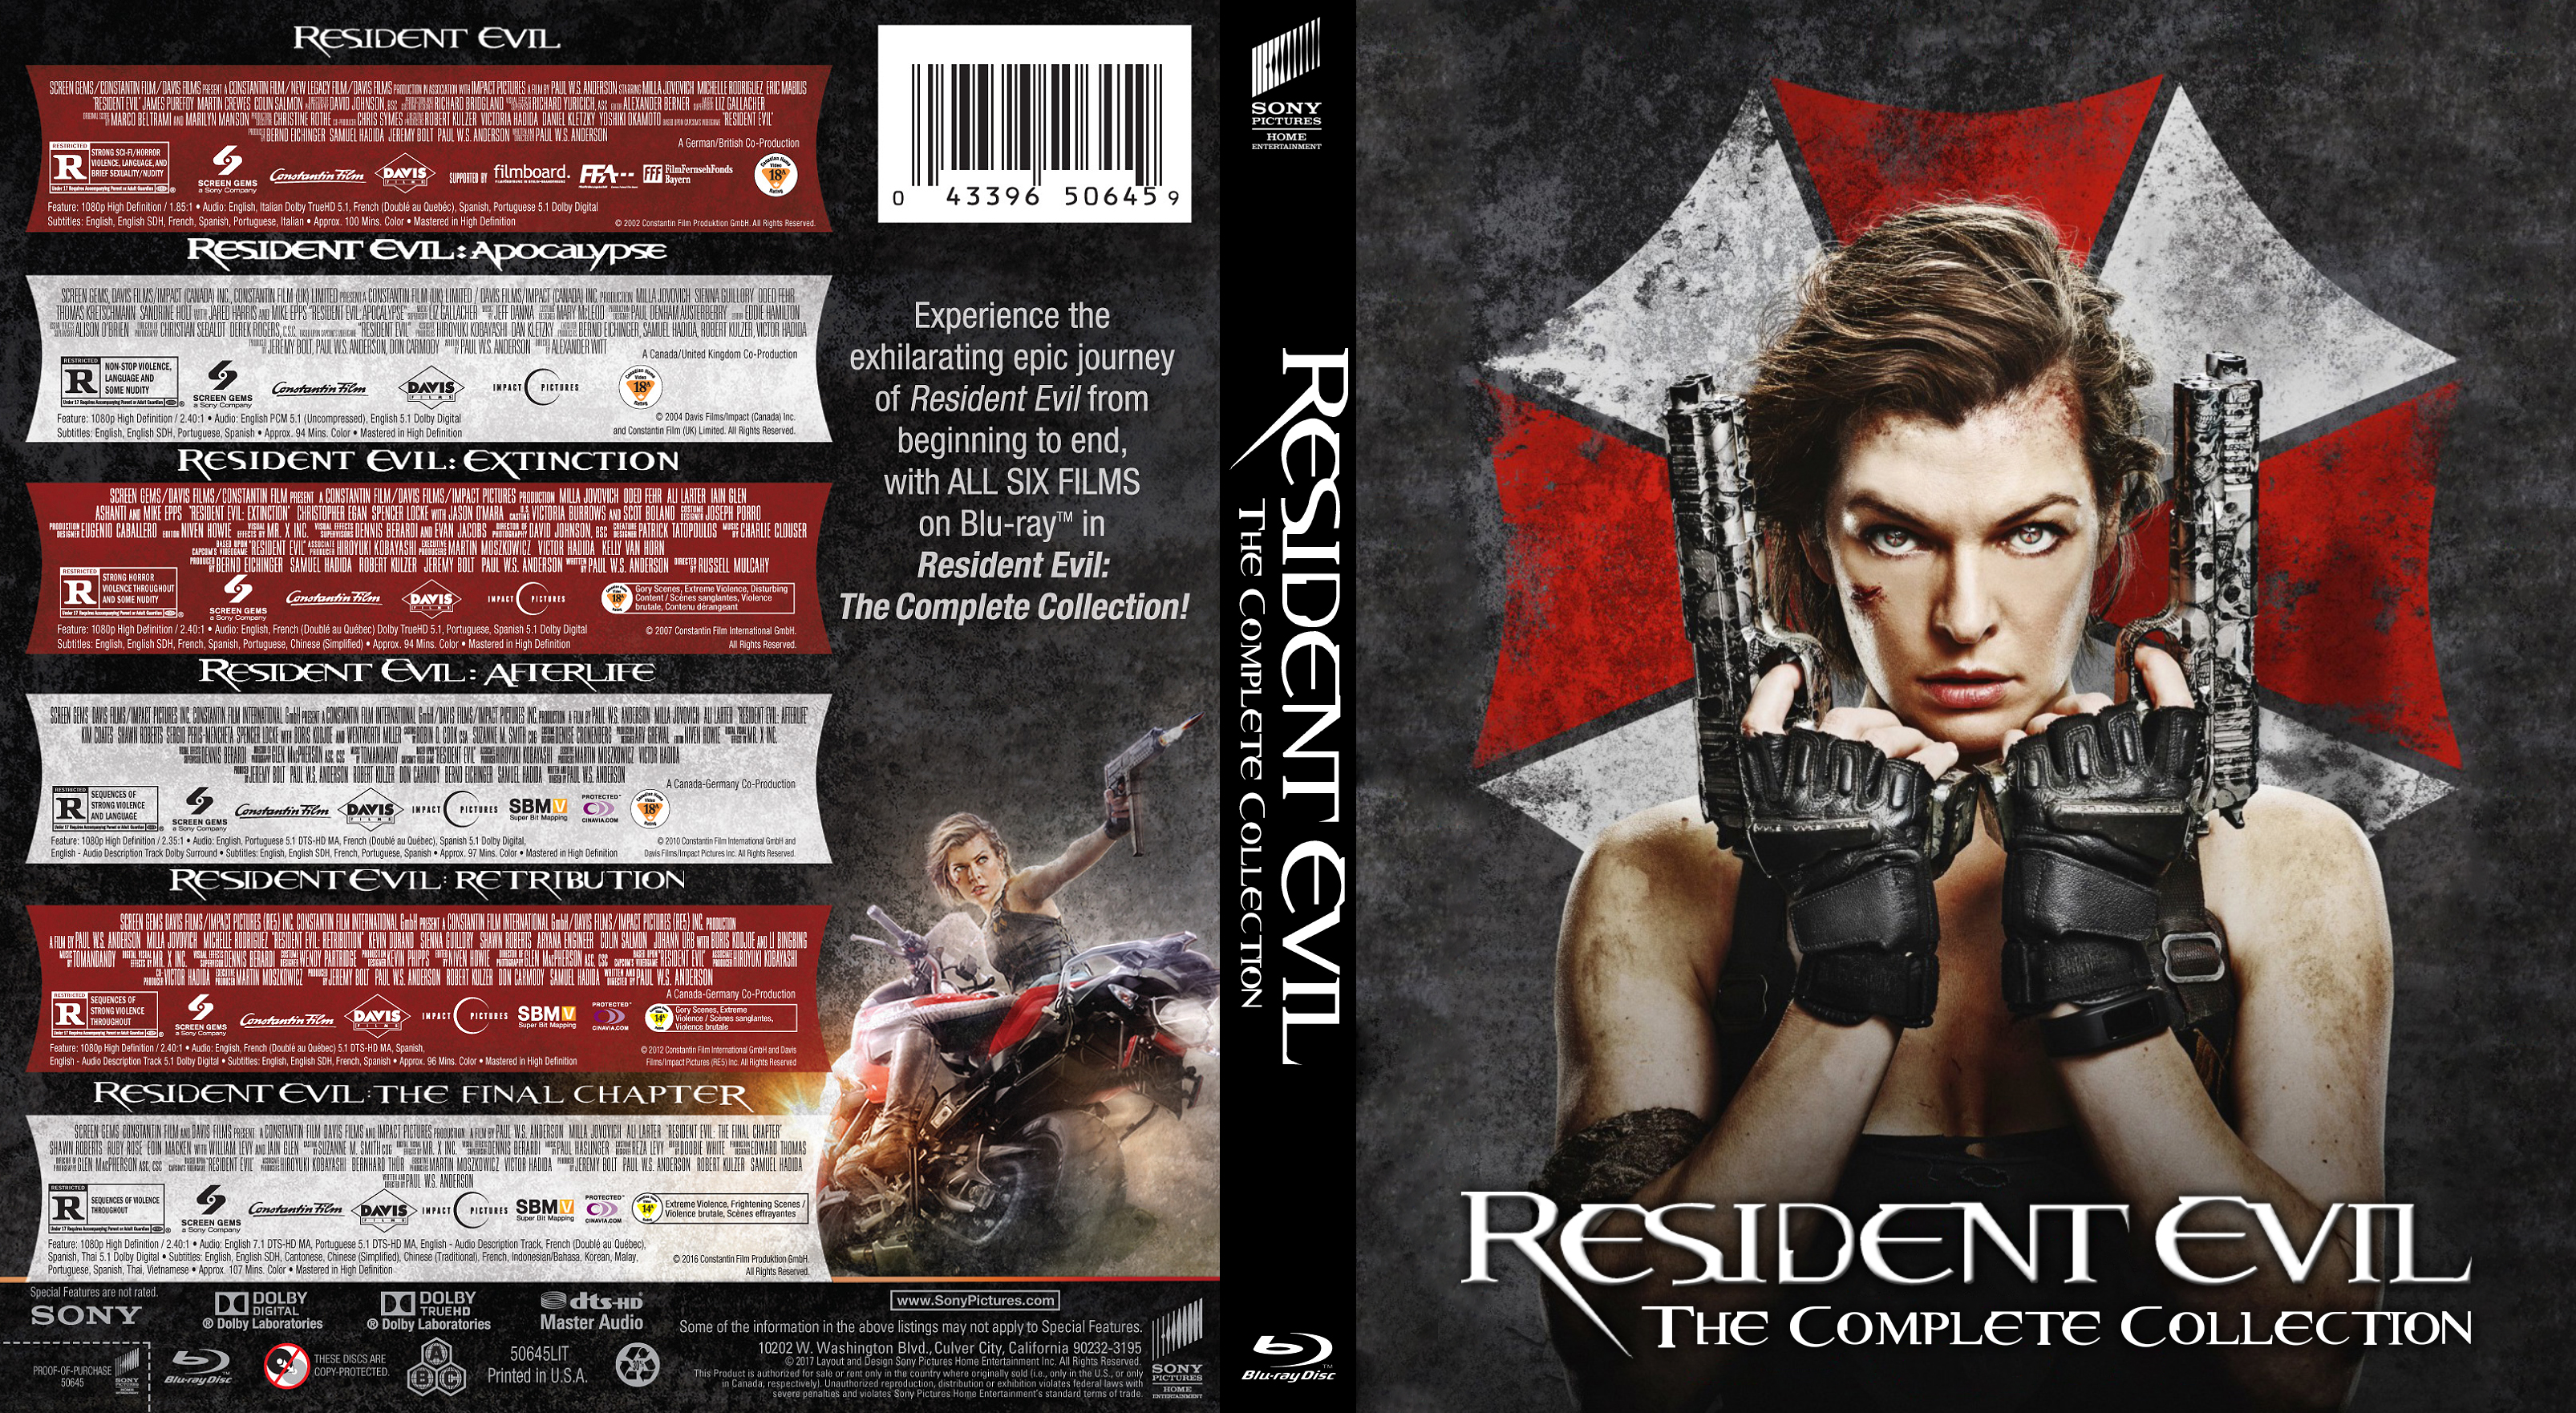 Blu Ray Resident Evil The Complete Collection By Morsoth On DeviantArt.